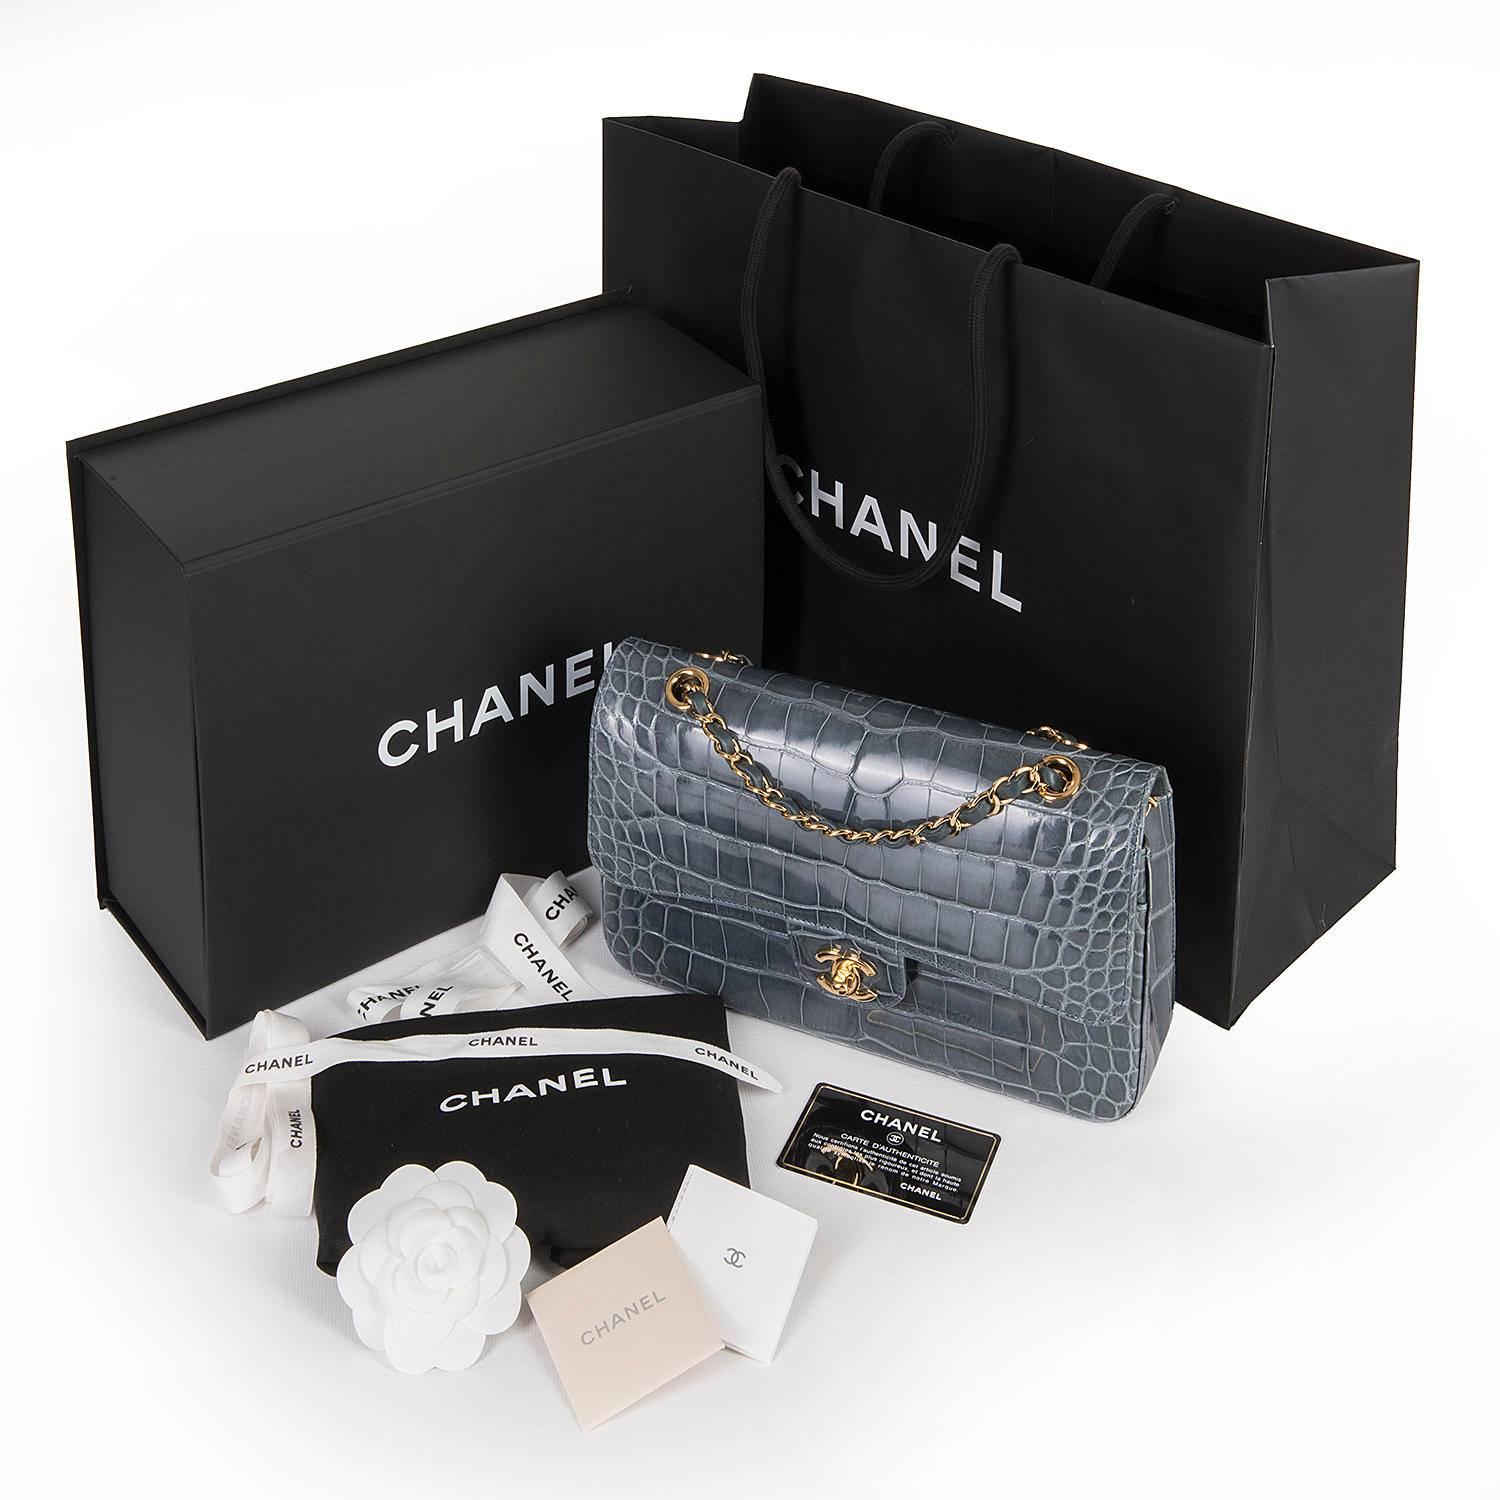 Such a Rare Bag !! This Chanel Medium Double-flap Alligator 'Sac Timeless' in a very rare colour - Graphite Blue is finished with luxury Gold hardware. So collectable, the bag is in pristine, 'Store-fresh' condition and comes absolutely complete,